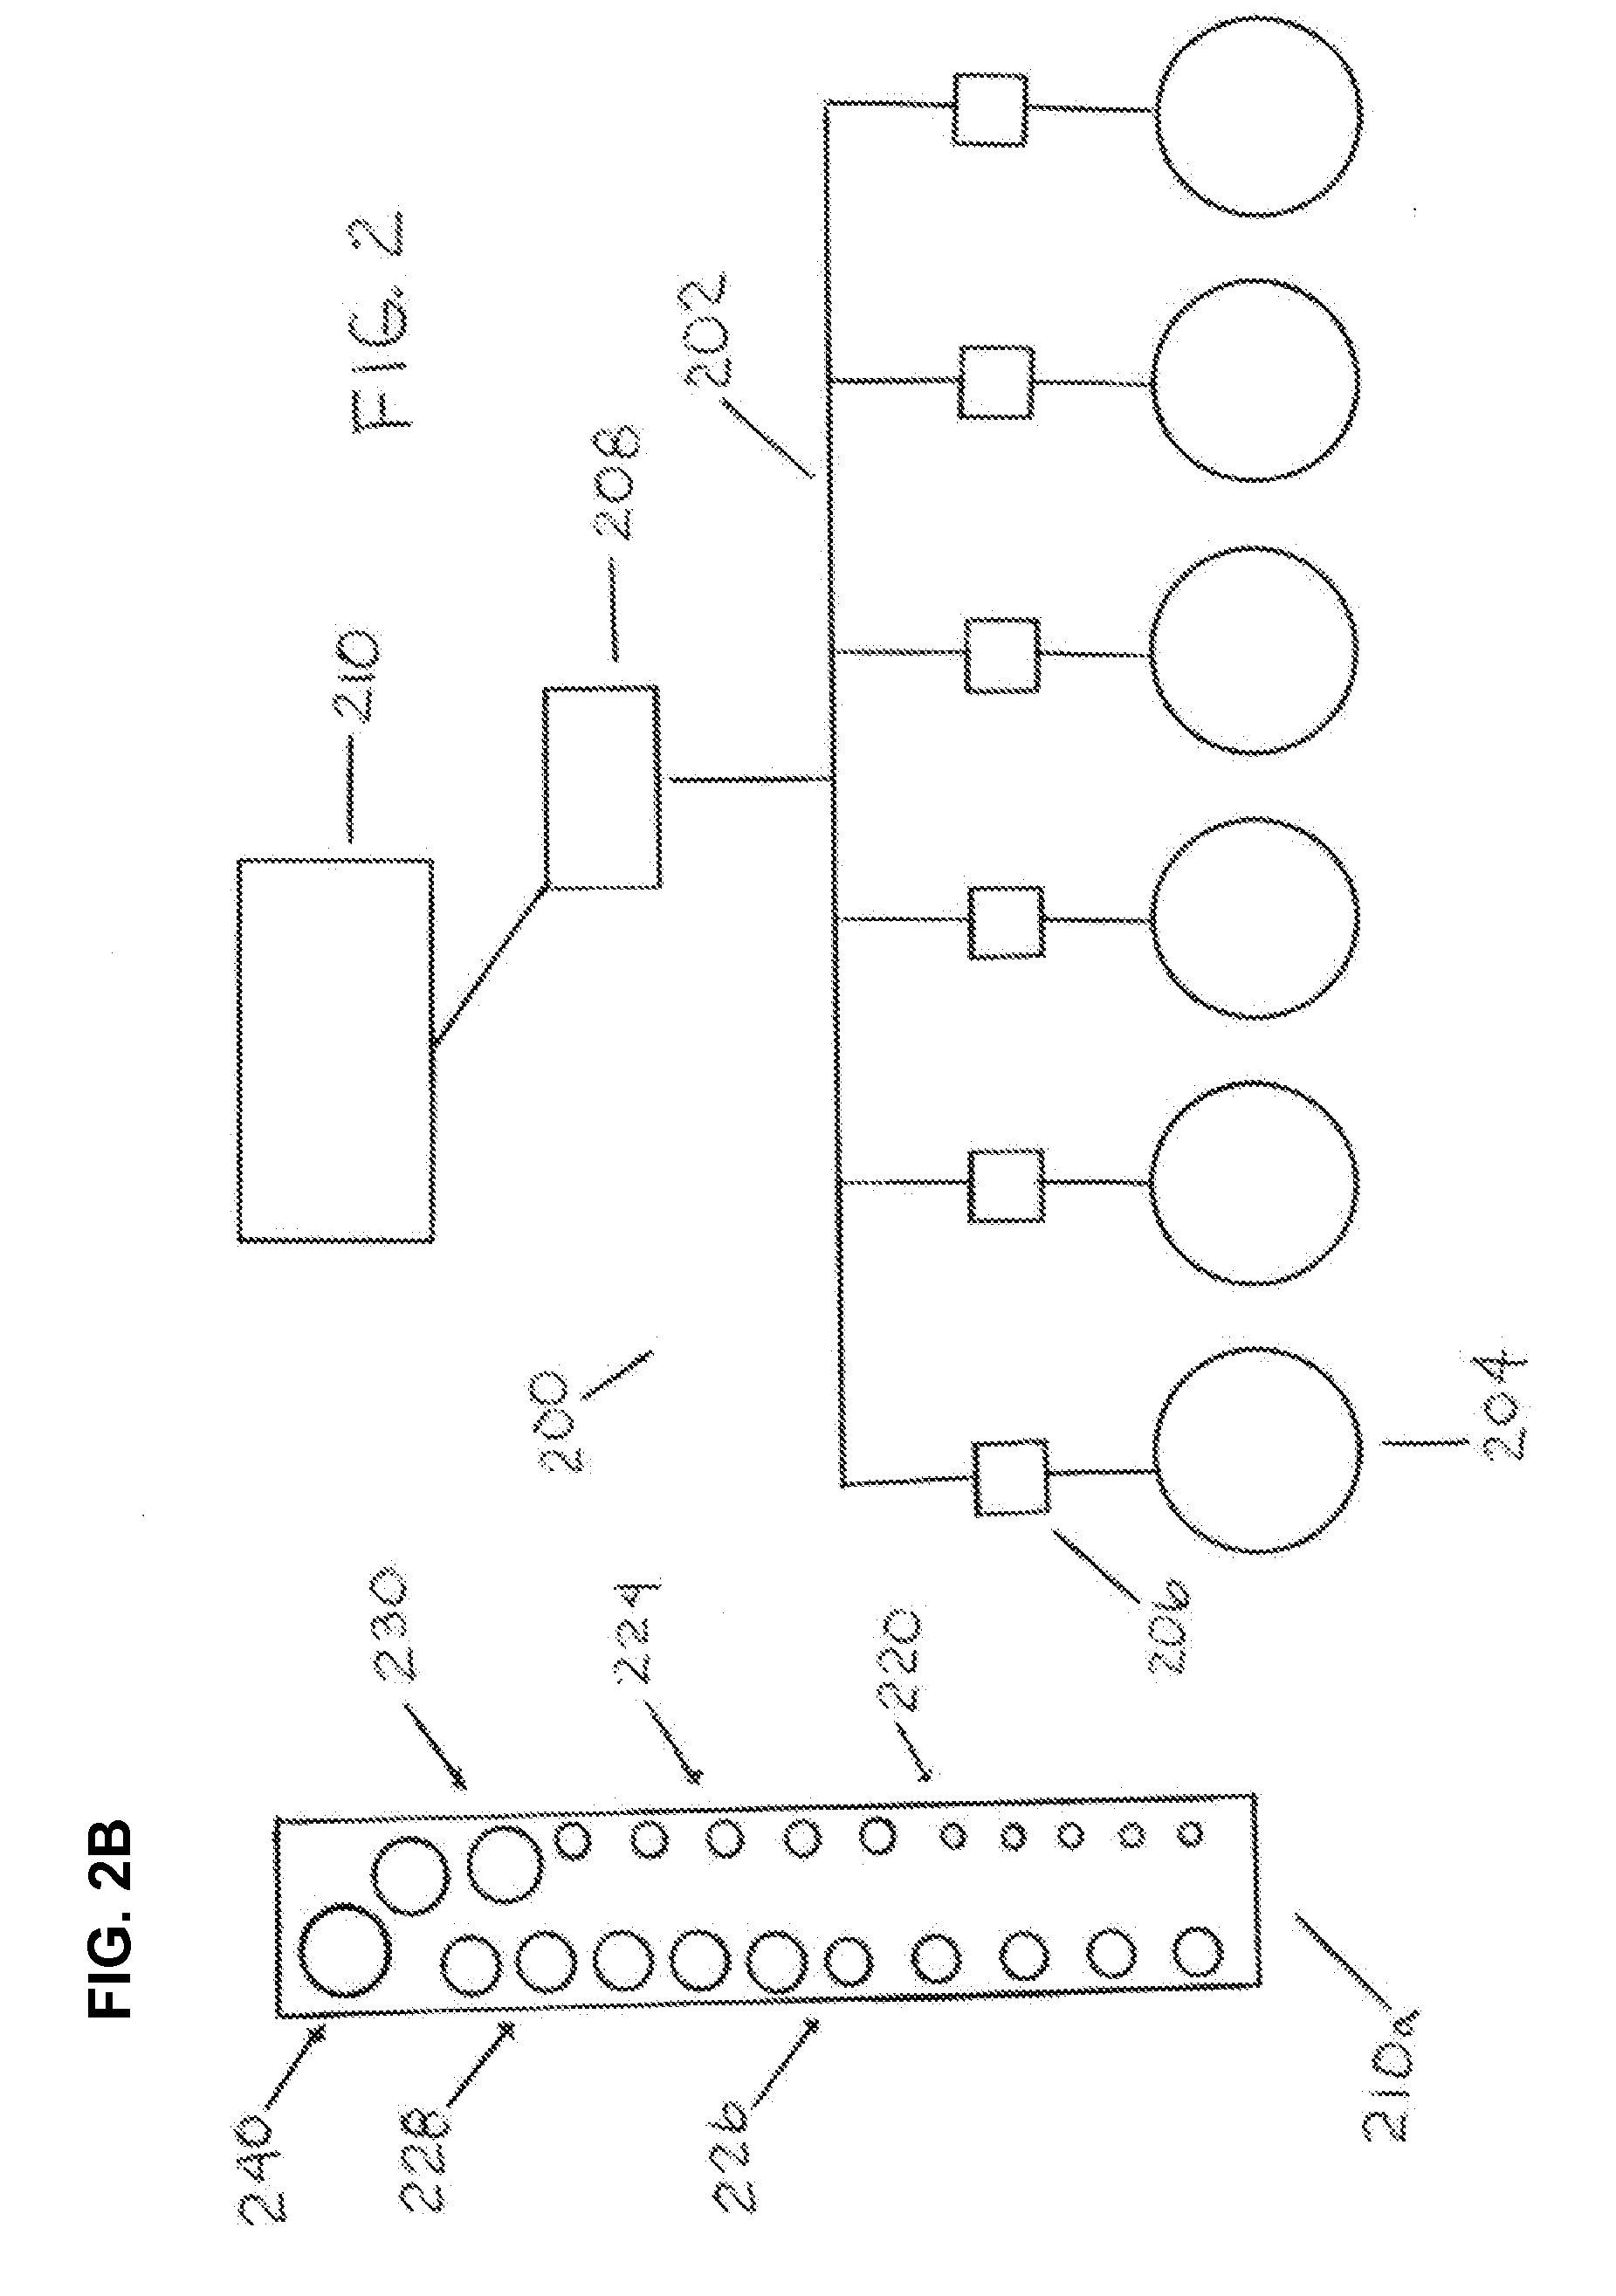 Electronic gaming system with physical gaming chips and wager display